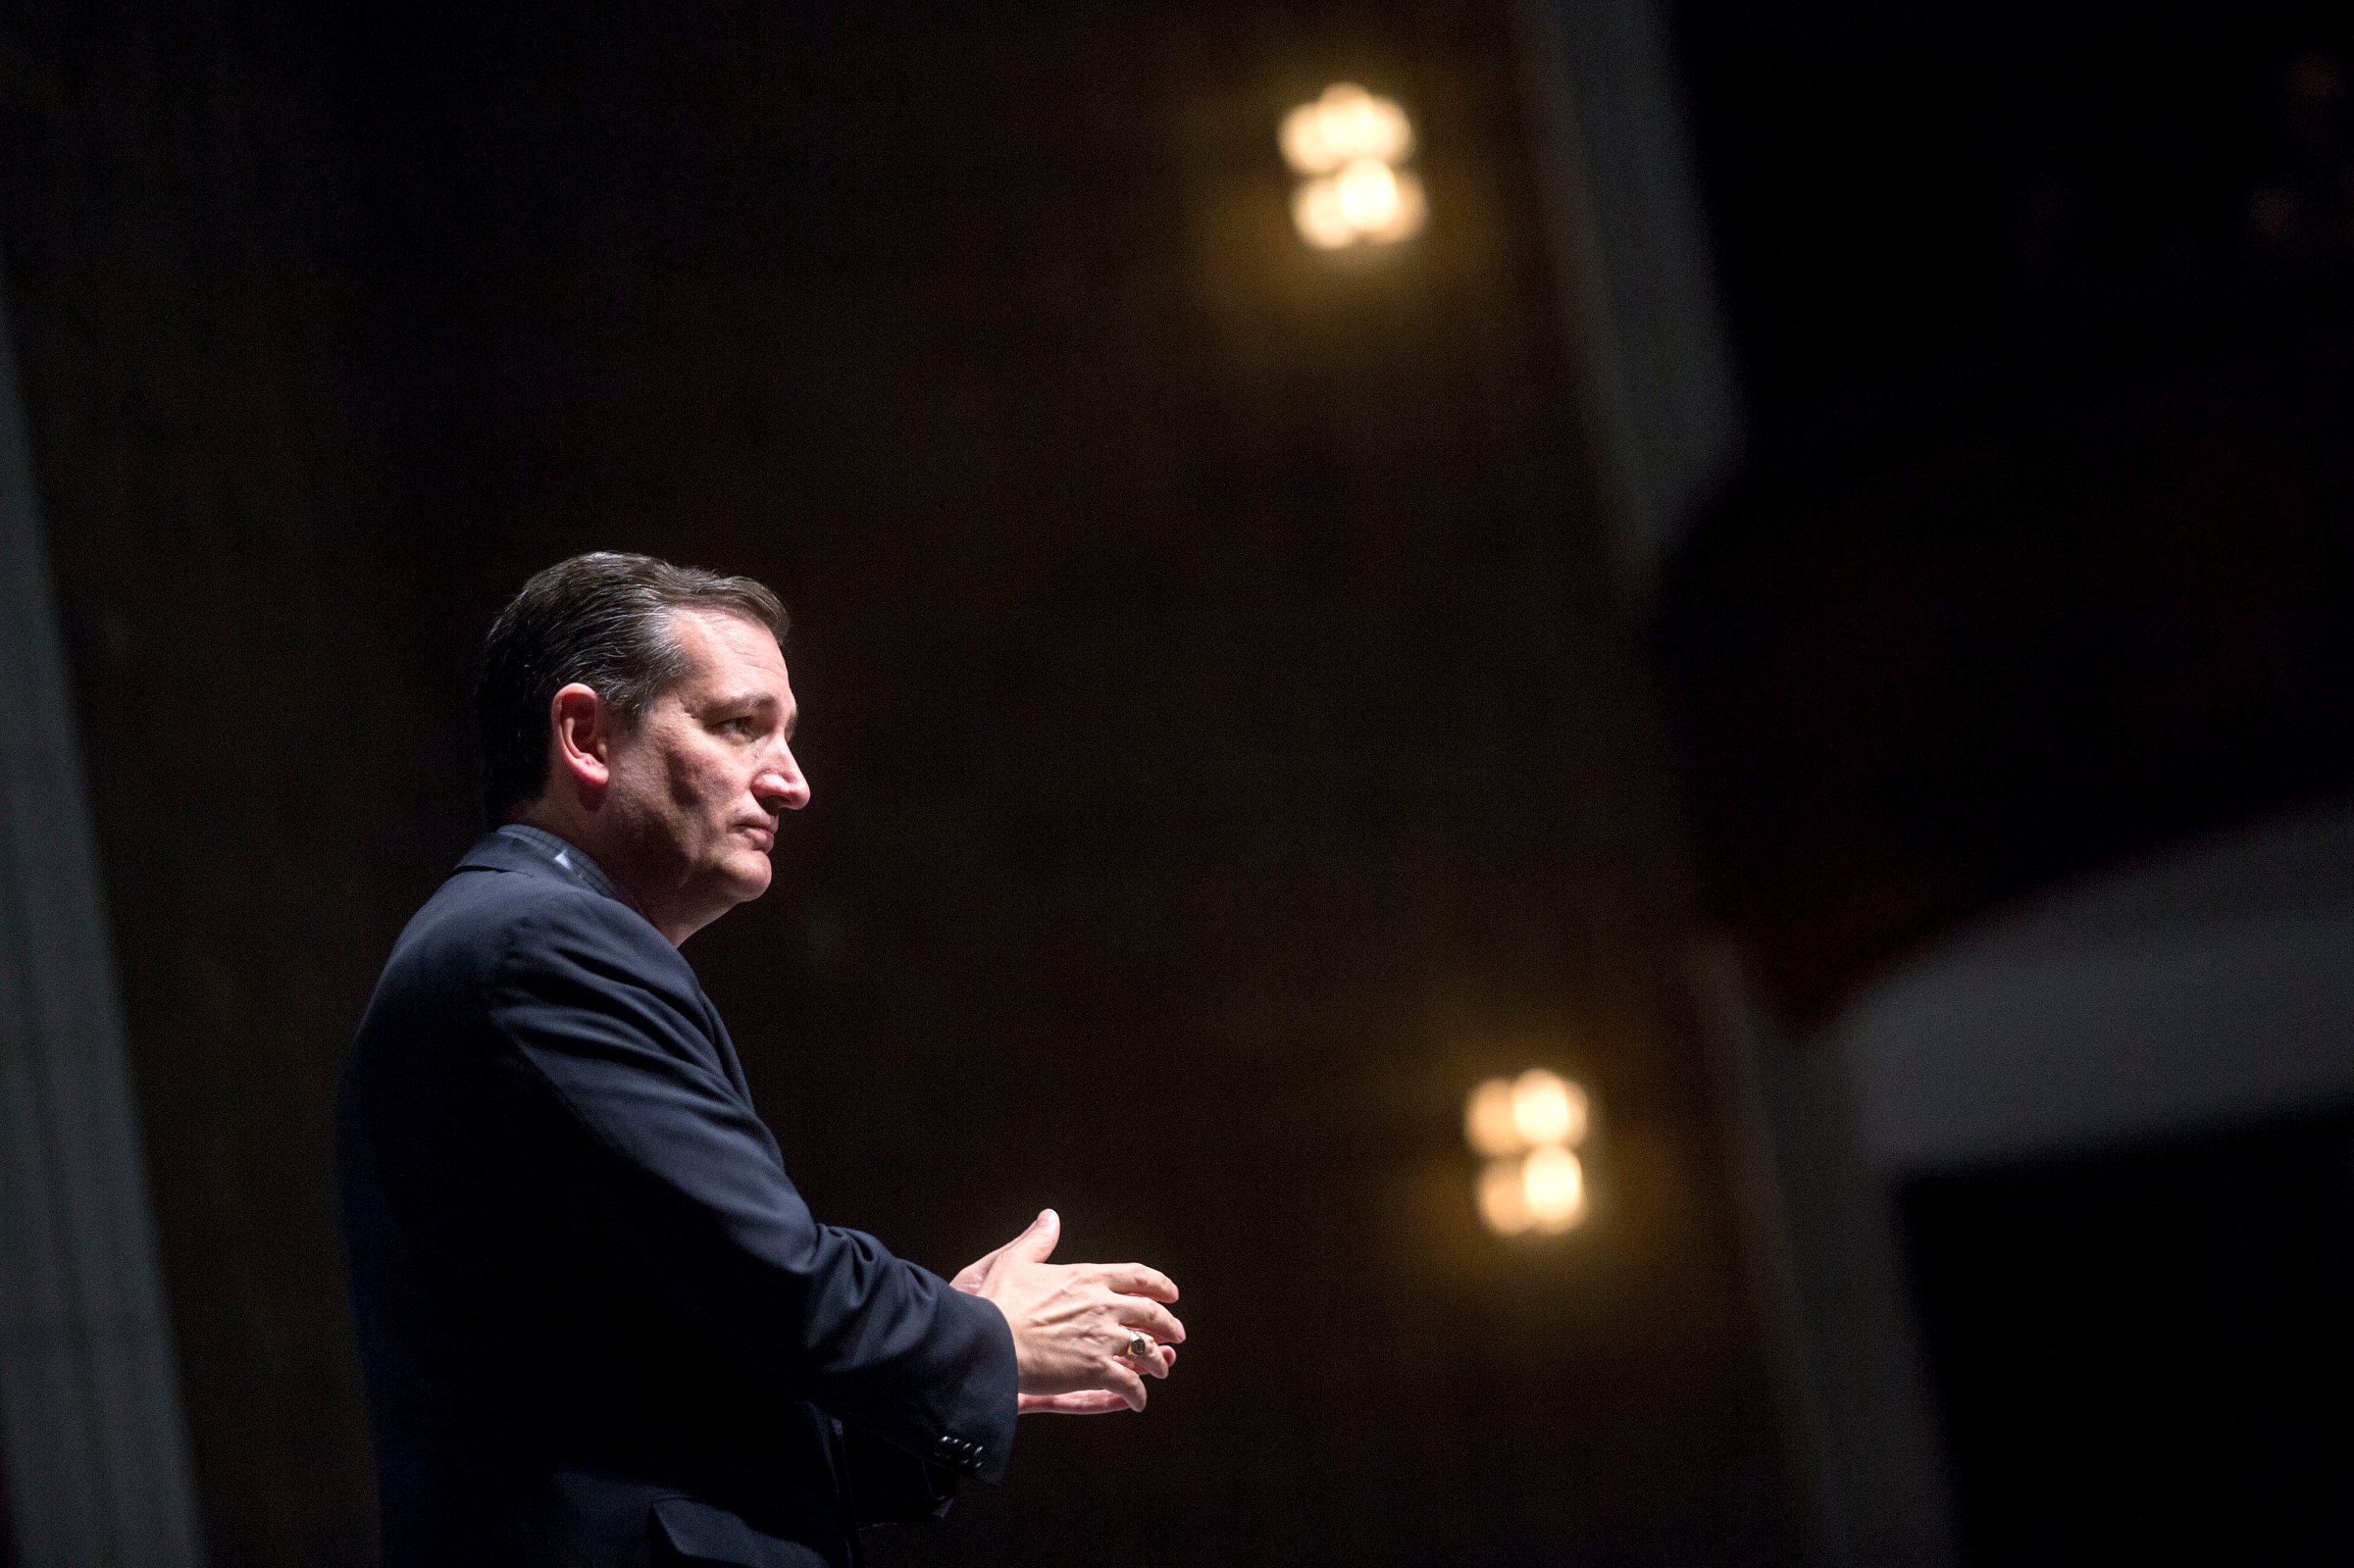 Senator Ted Cruz, a Republican from Texas and U.S. 2016 presidential candidate, pauses while speaking during the South Carolina Freedom Summit hosted by Citizens United and Congressman Jeff Duncan in Greenville, South Carolina, U.S., on May 9, 2015.